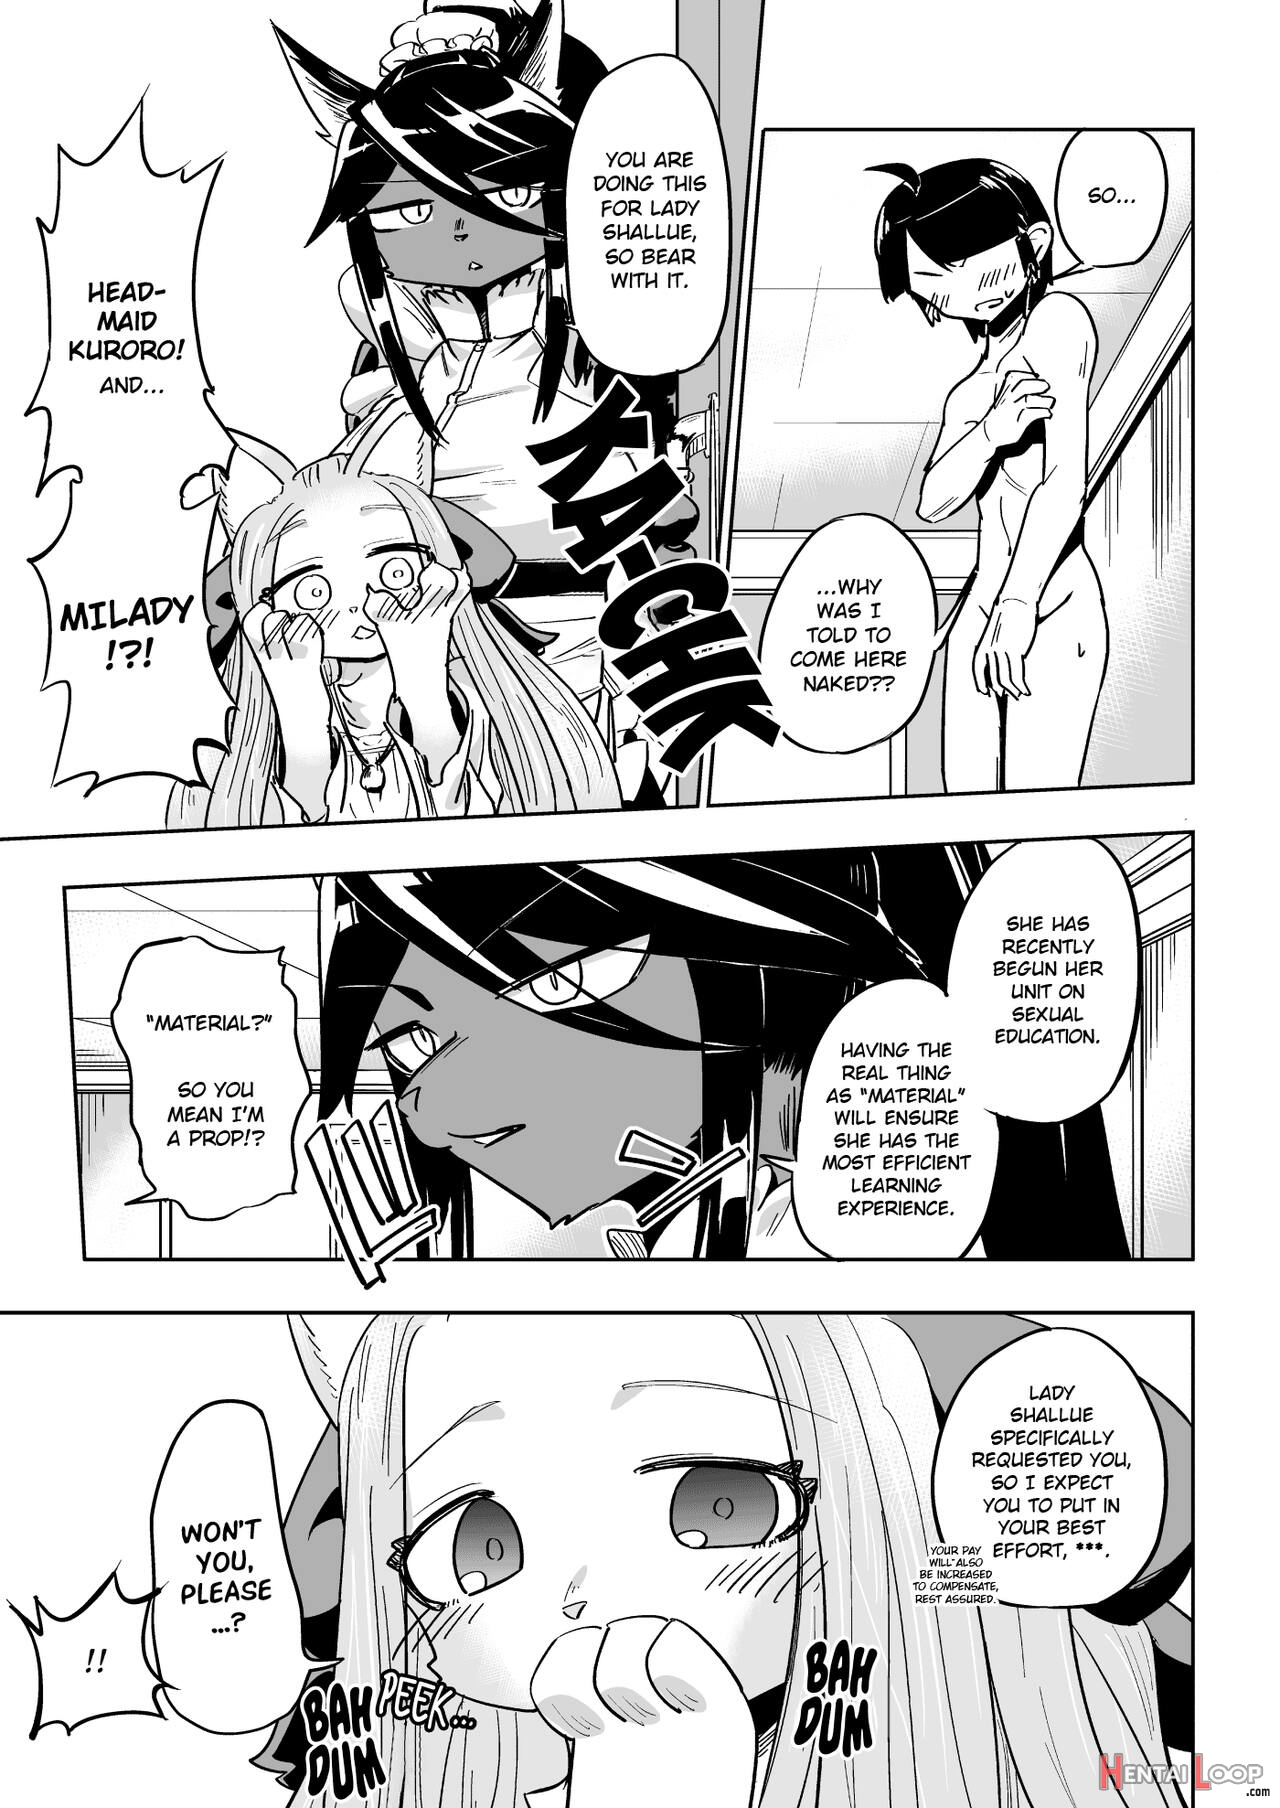 Milady Needs Sex-ed, And I'm The Prop! page 4